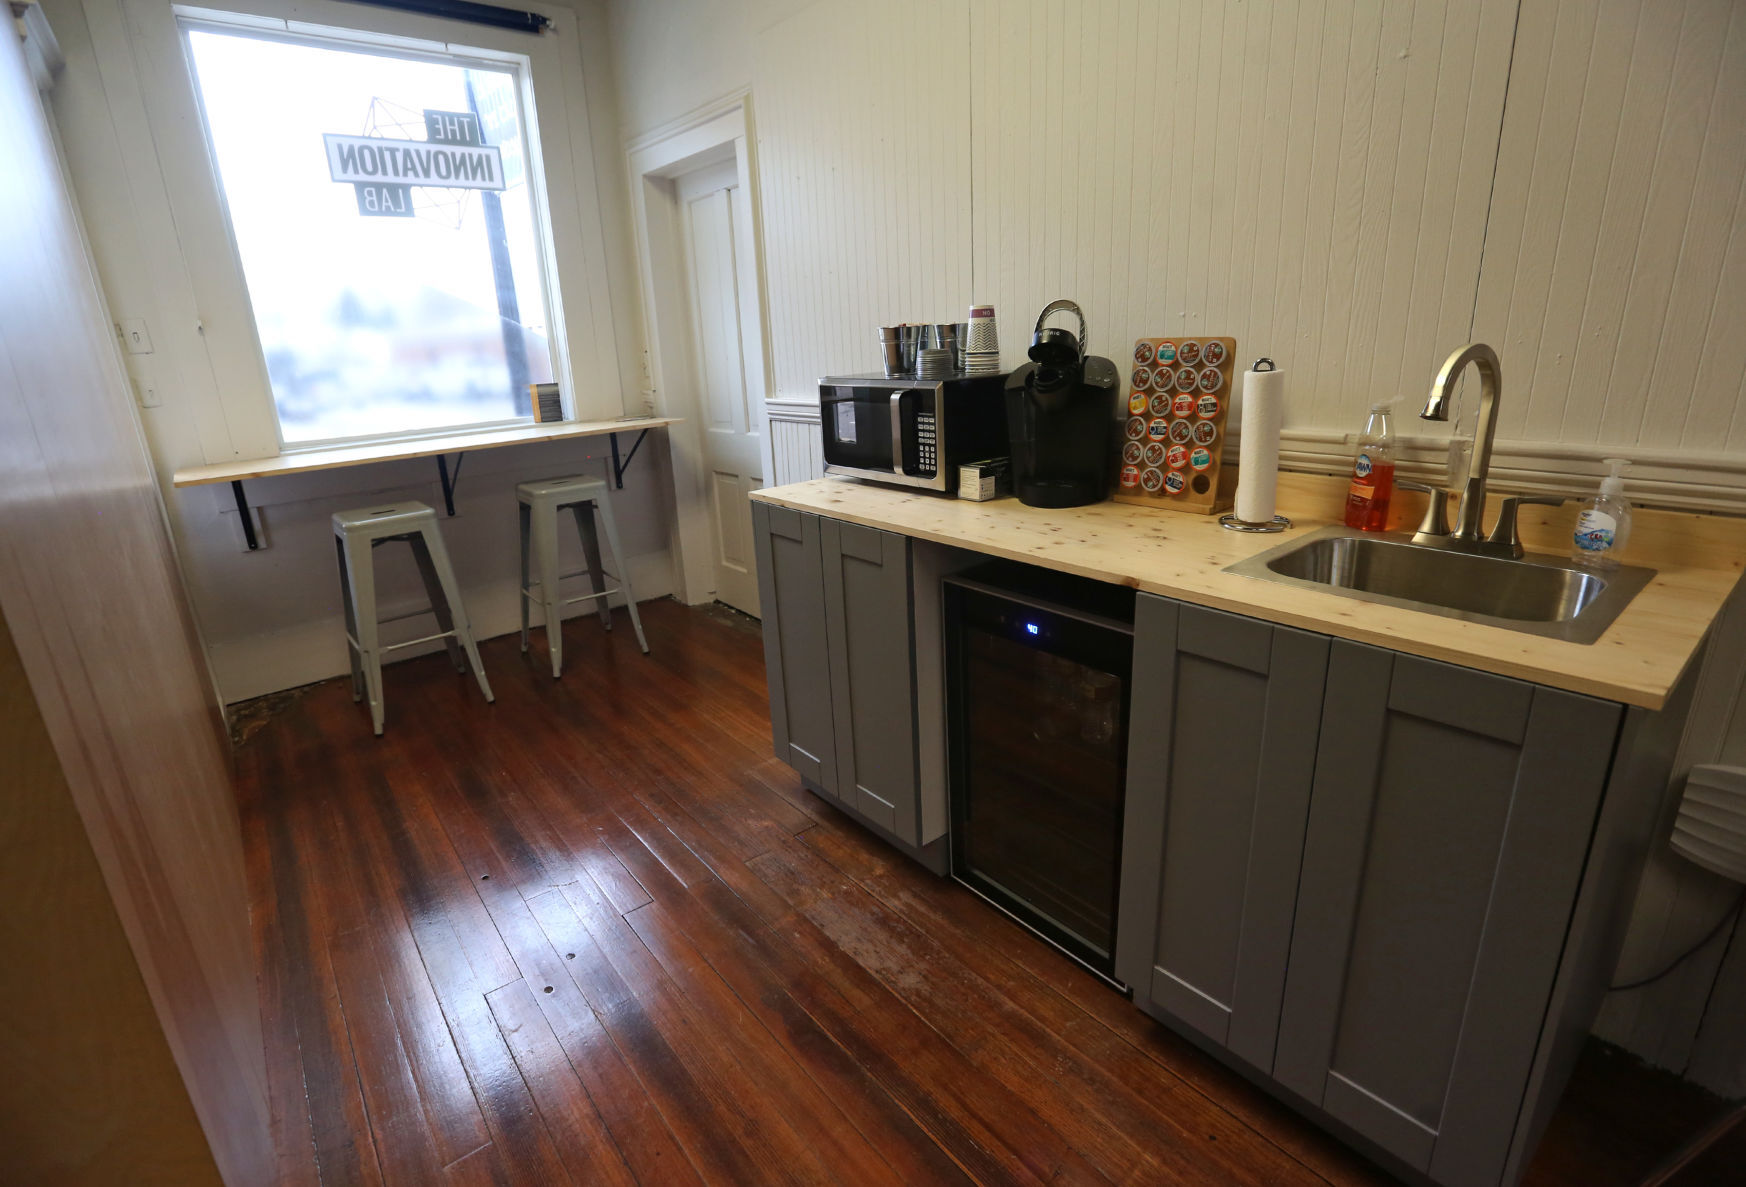 A coffee bar area at The Innovation Lab in Cascade, Iowa. PHOTO CREDIT: JESSICA REILLY